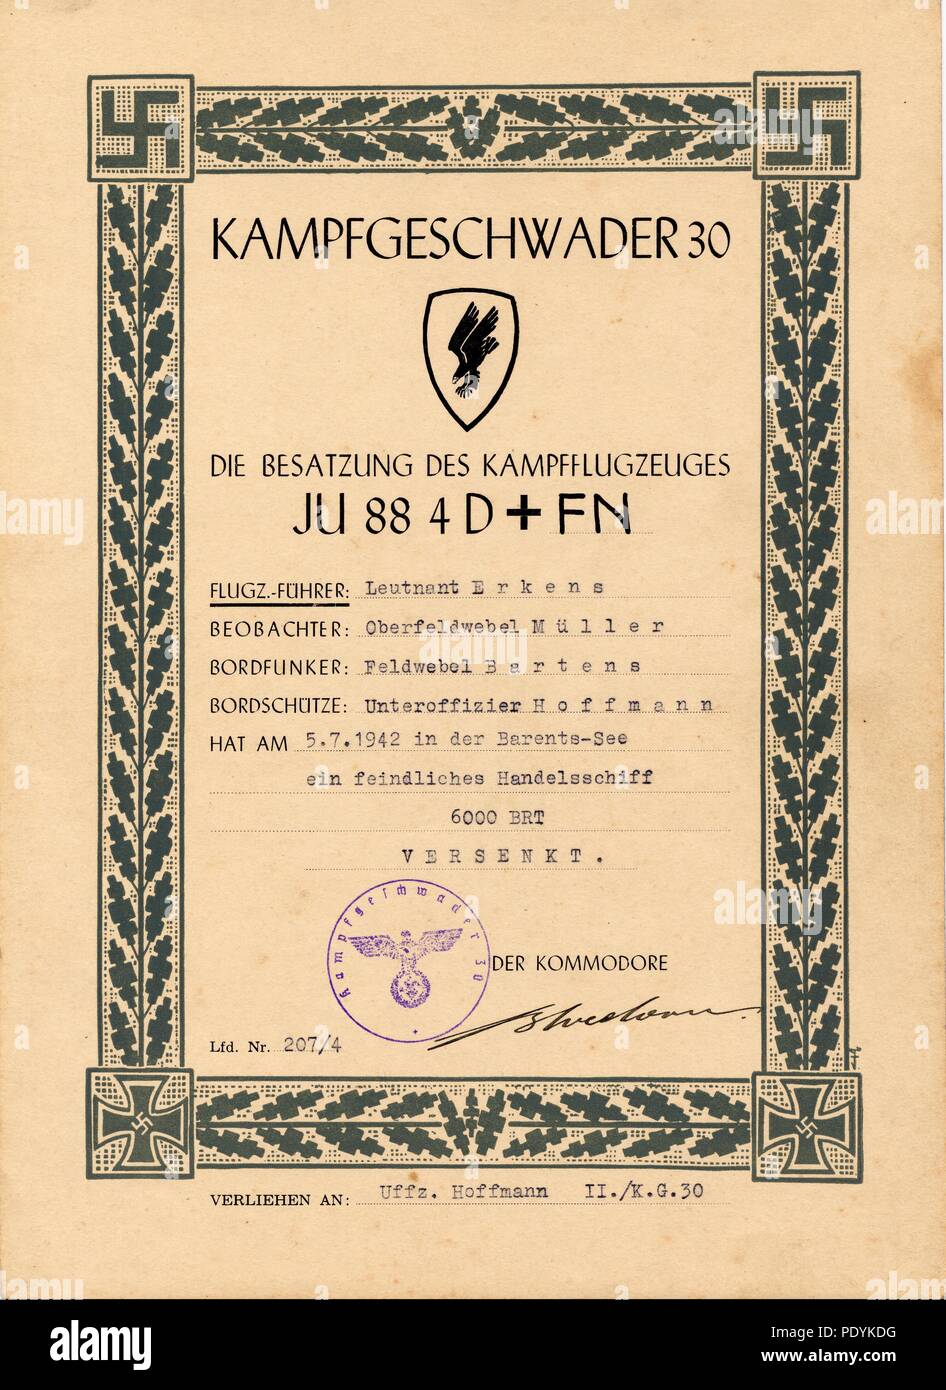 Certificate awarded to Feldwebel Willi Hoffmann of 5. Staffel, Kampfgeschwader 30: Awarded by KG 30 to Leutnant Willi Erkens (Pilot), Oberfeldwebel Richard Müller (Observer), Feldwebel Bartens (Radio Operator) and Unteroffizier Willi Hoffmann (Air Gunner) of 5./KG 30 for sinking an enemy merchant ship in the Barents Sea on 5th July 1942, while crewing Junkers Ju 88 4D+FN. The document is signed in ink by Major Erich Bloedorn, Kommodore of Kampfgeschwader 30. The date coincides with a day of devastating attacks on Allied convoy PQ17 and may relate to the MV Peter Kerr. Stock Photo